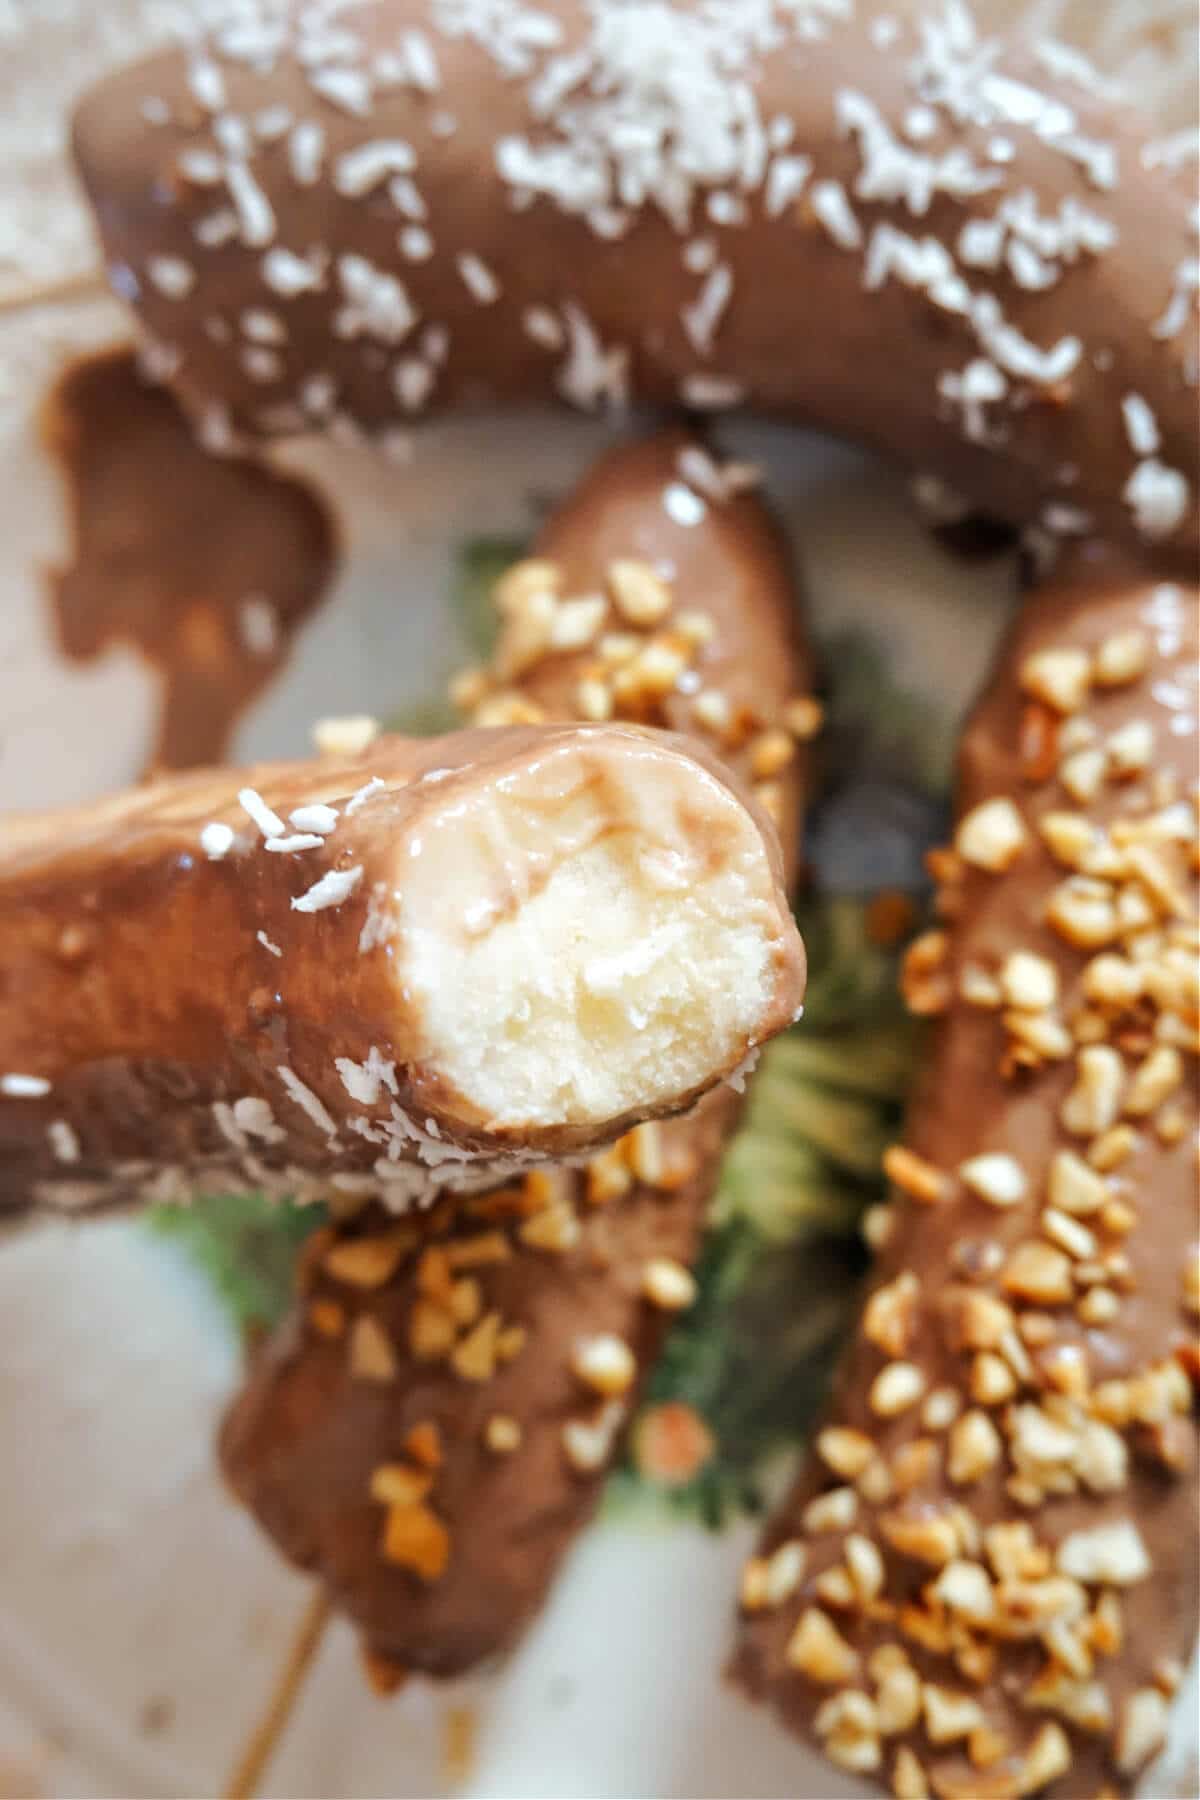 A chocolate-covered banana bitten into it with more chocolate bananas in the background